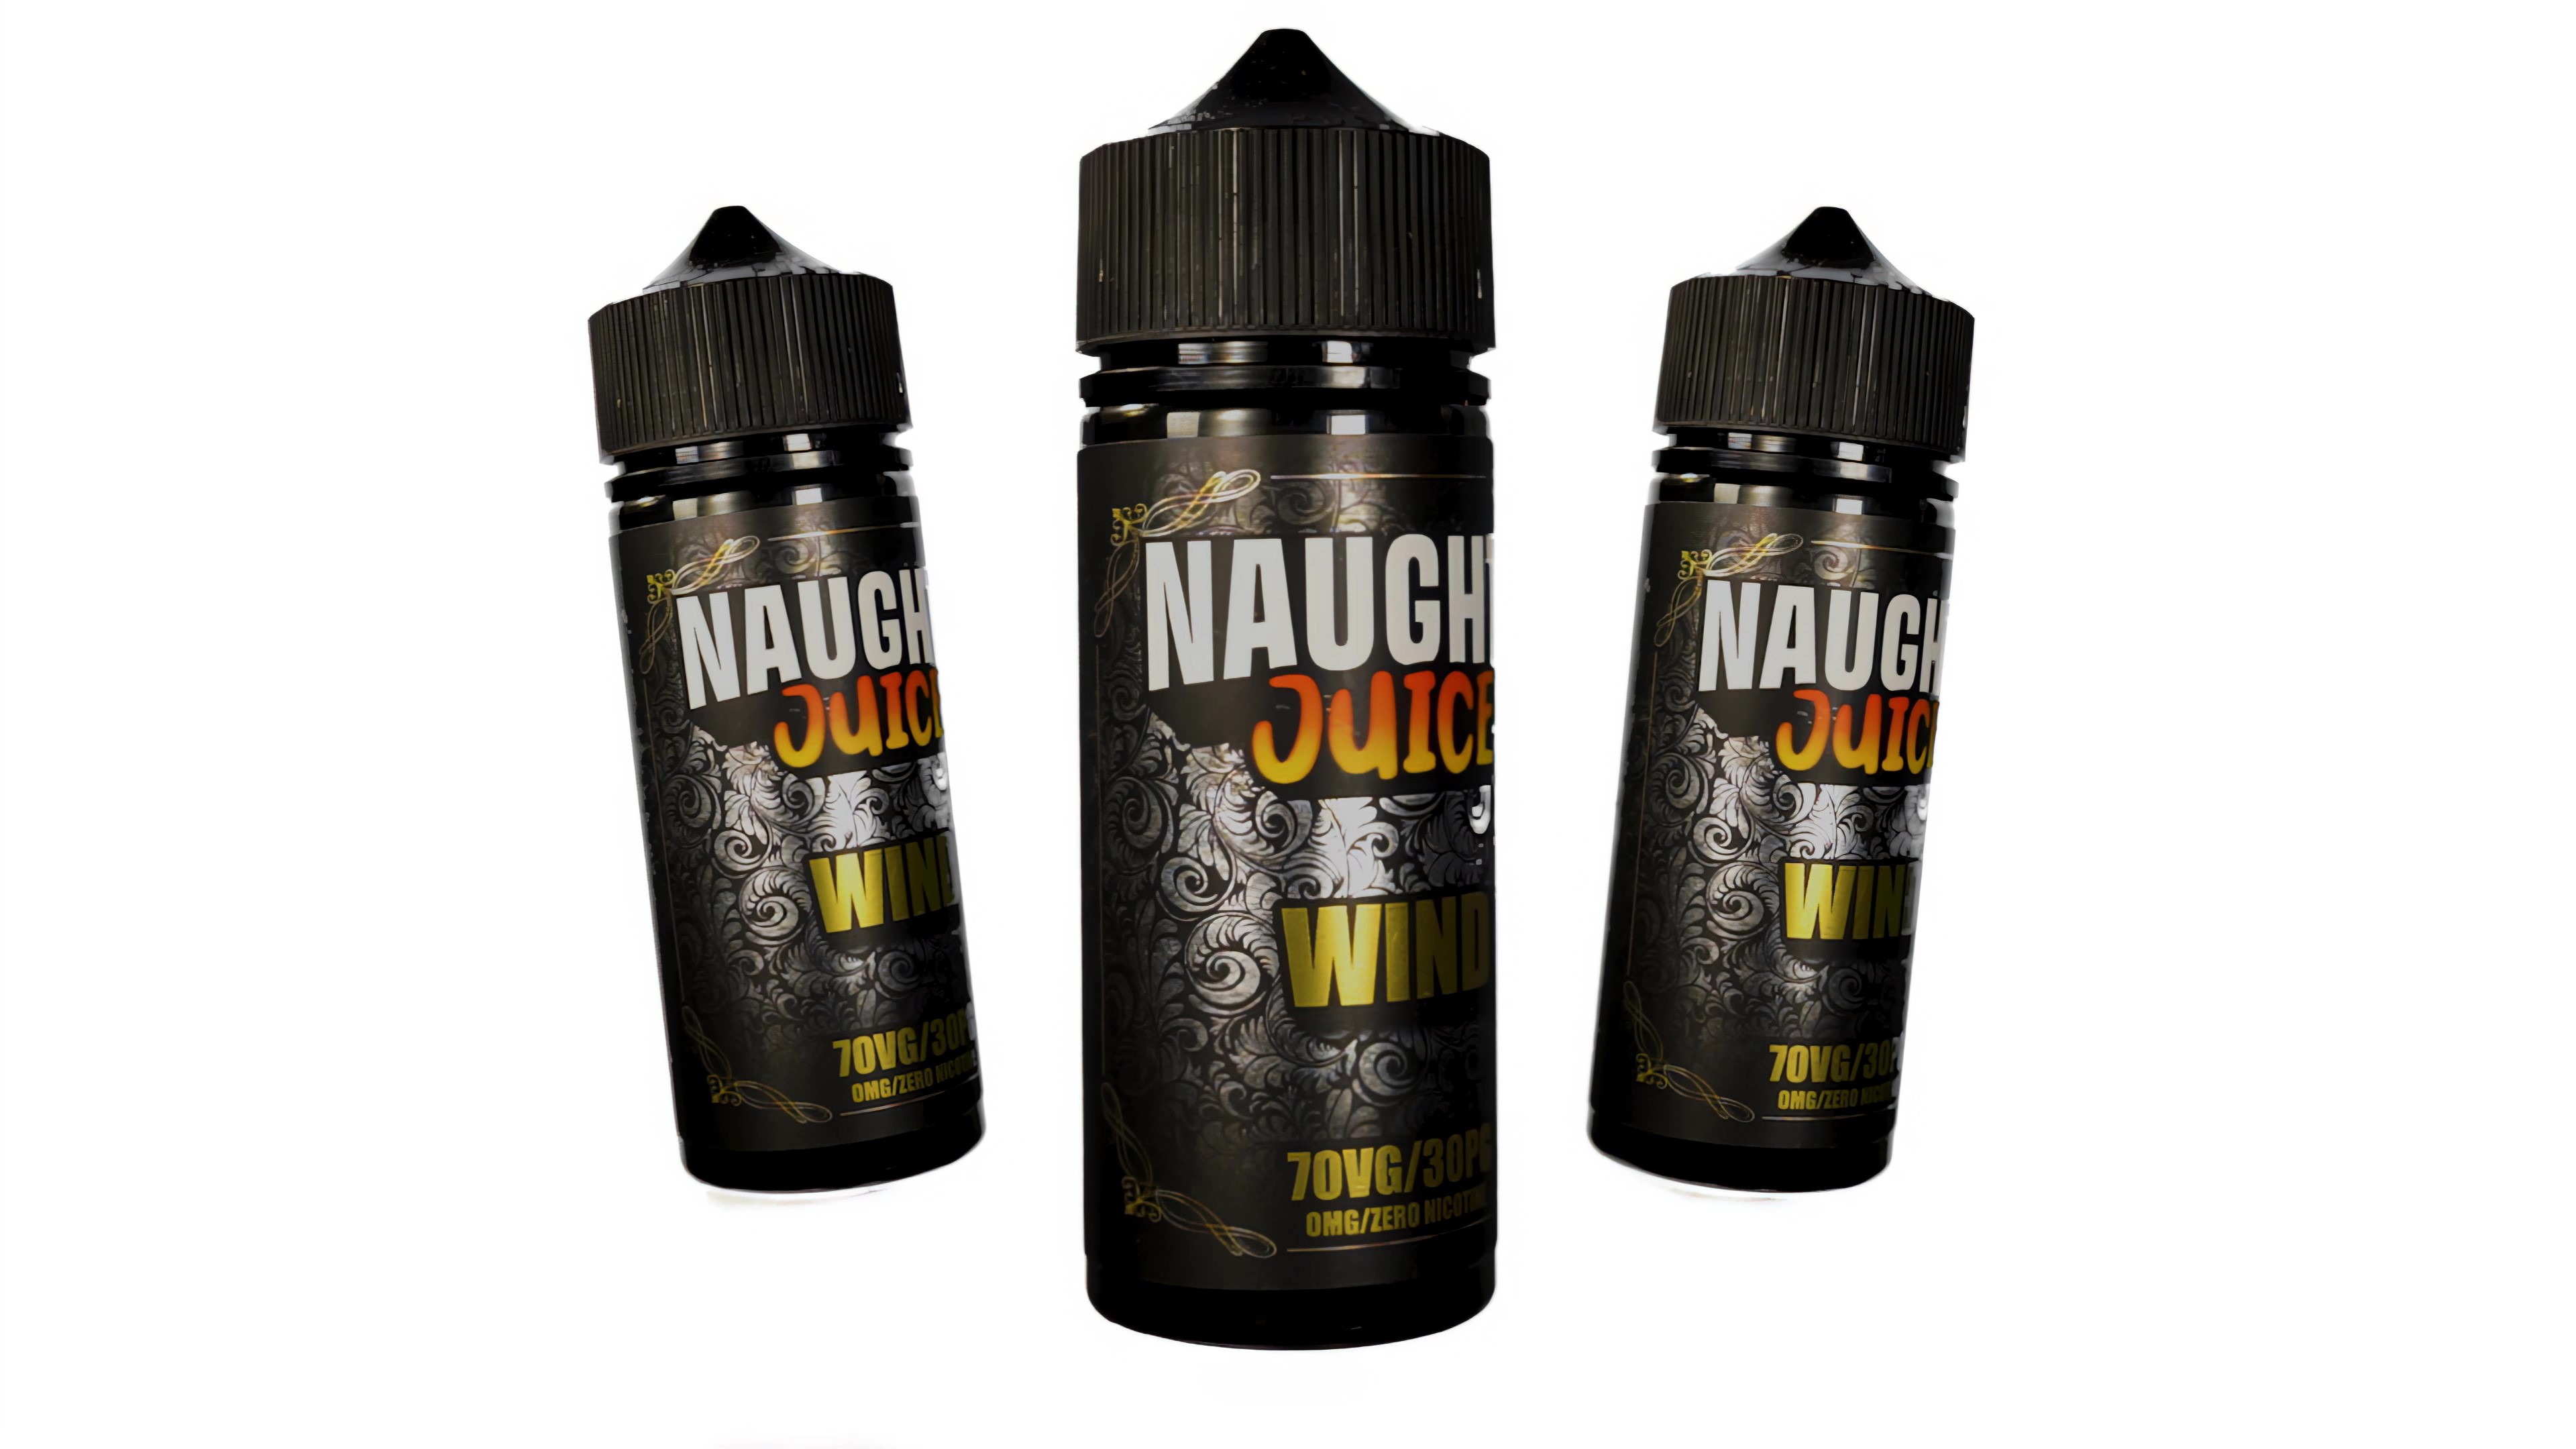 Naughty Juice Wind Video Production
